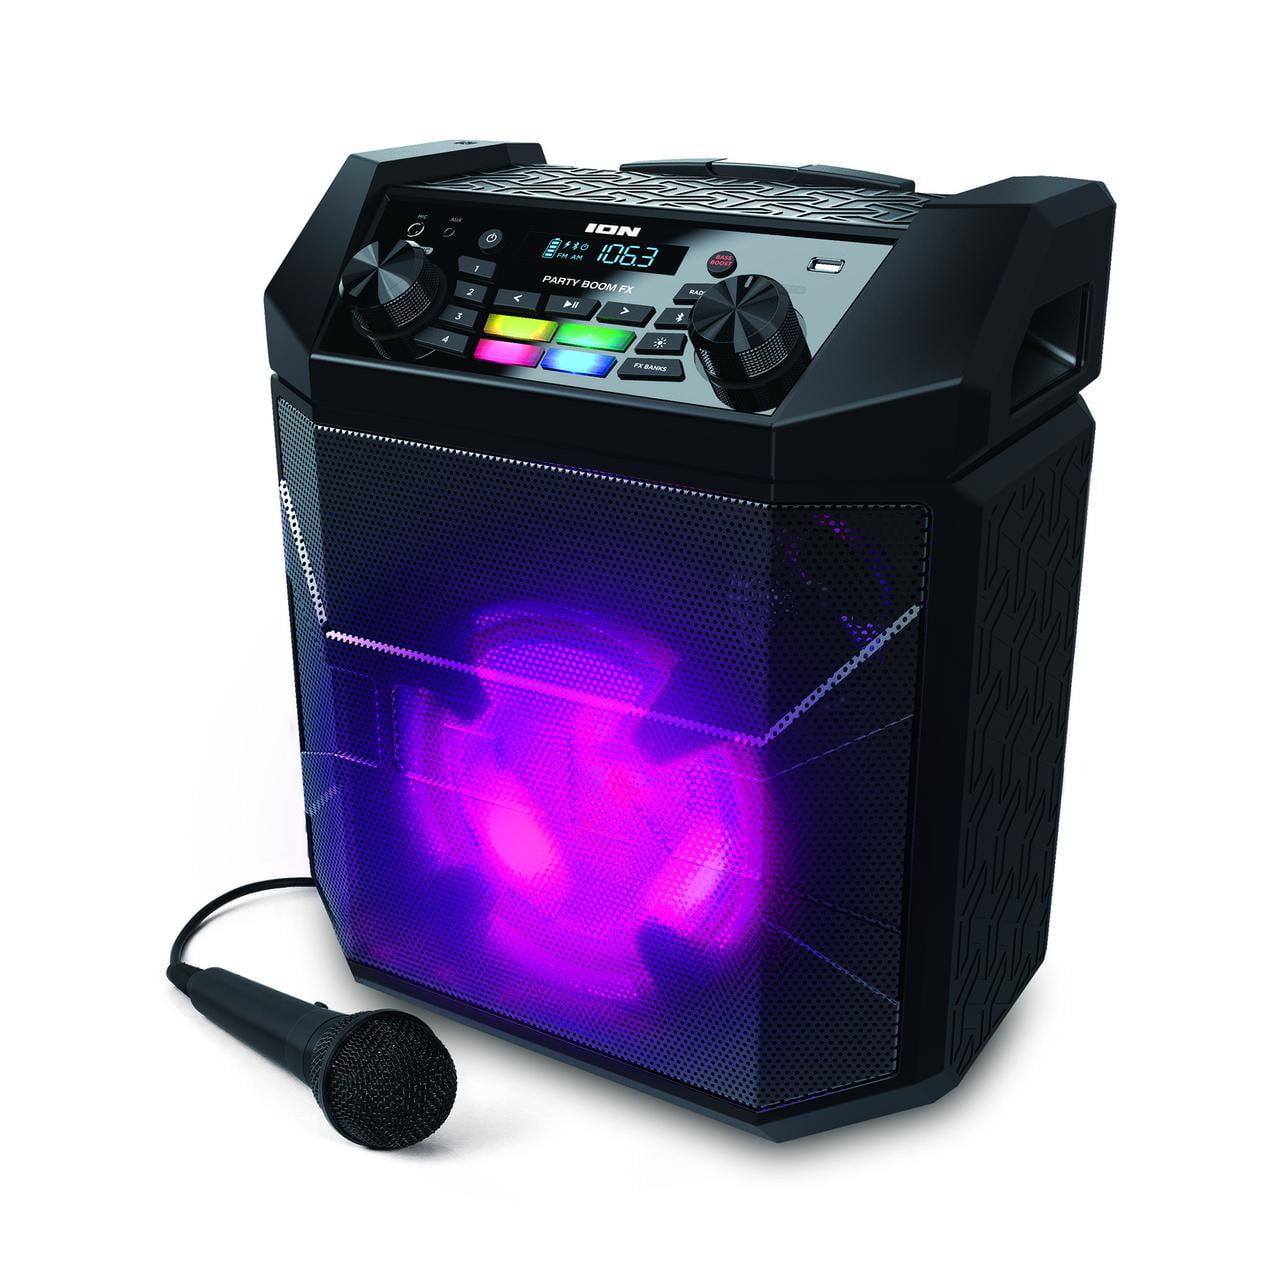 Gedachte Convergeren boog ION Audio Party Boom FX Portable Bluetooth Speaker with LED Lighting,  Black, iPA101A - Walmart.com